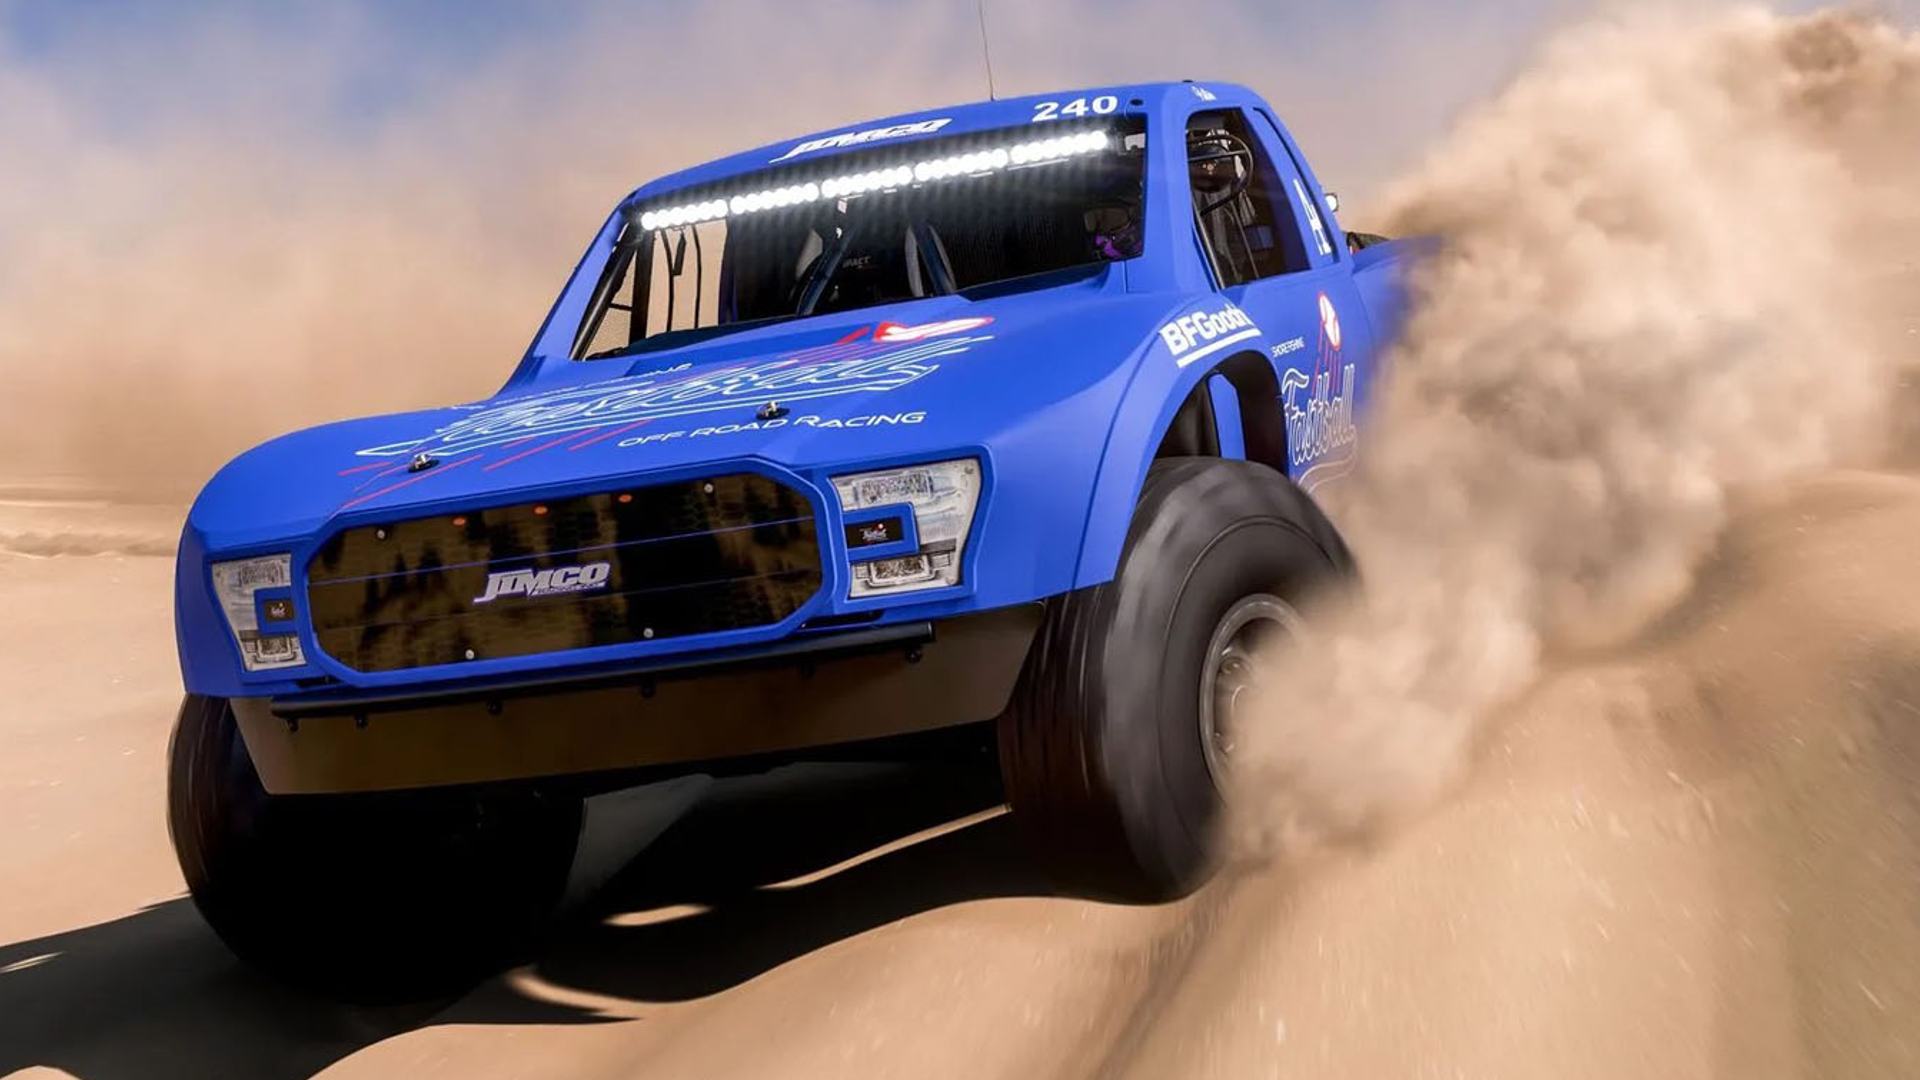 Forza Horizo​​n 5 Rally Adventure Cars: The 2019 Jimco #240 Fastball Racing Spec Trophy Truck を見ることができます